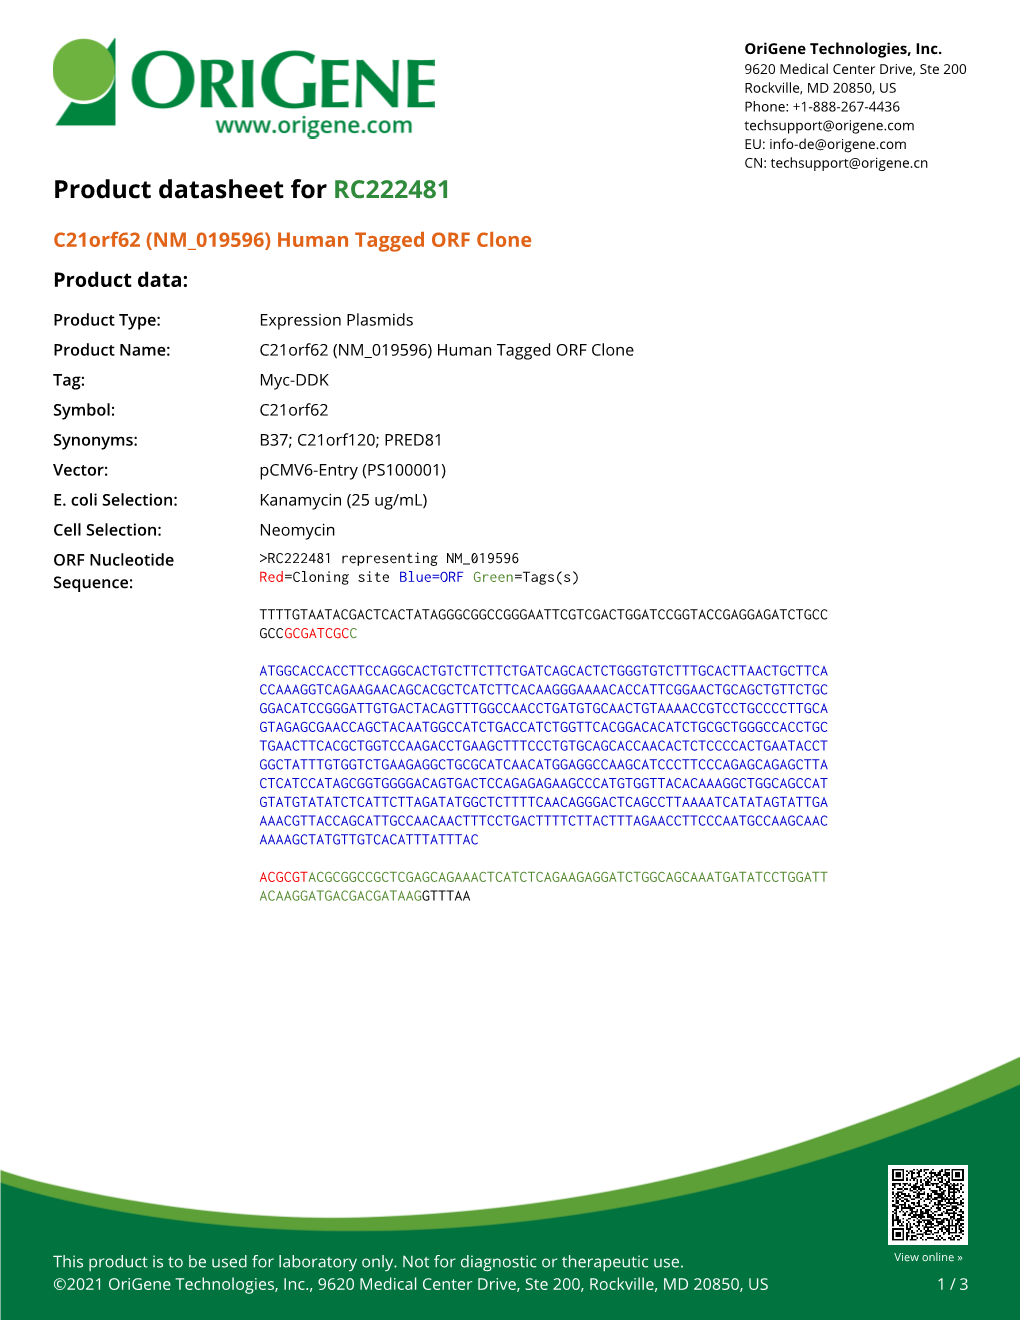 C21orf62 (NM 019596) Human Tagged ORF Clone – RC222481